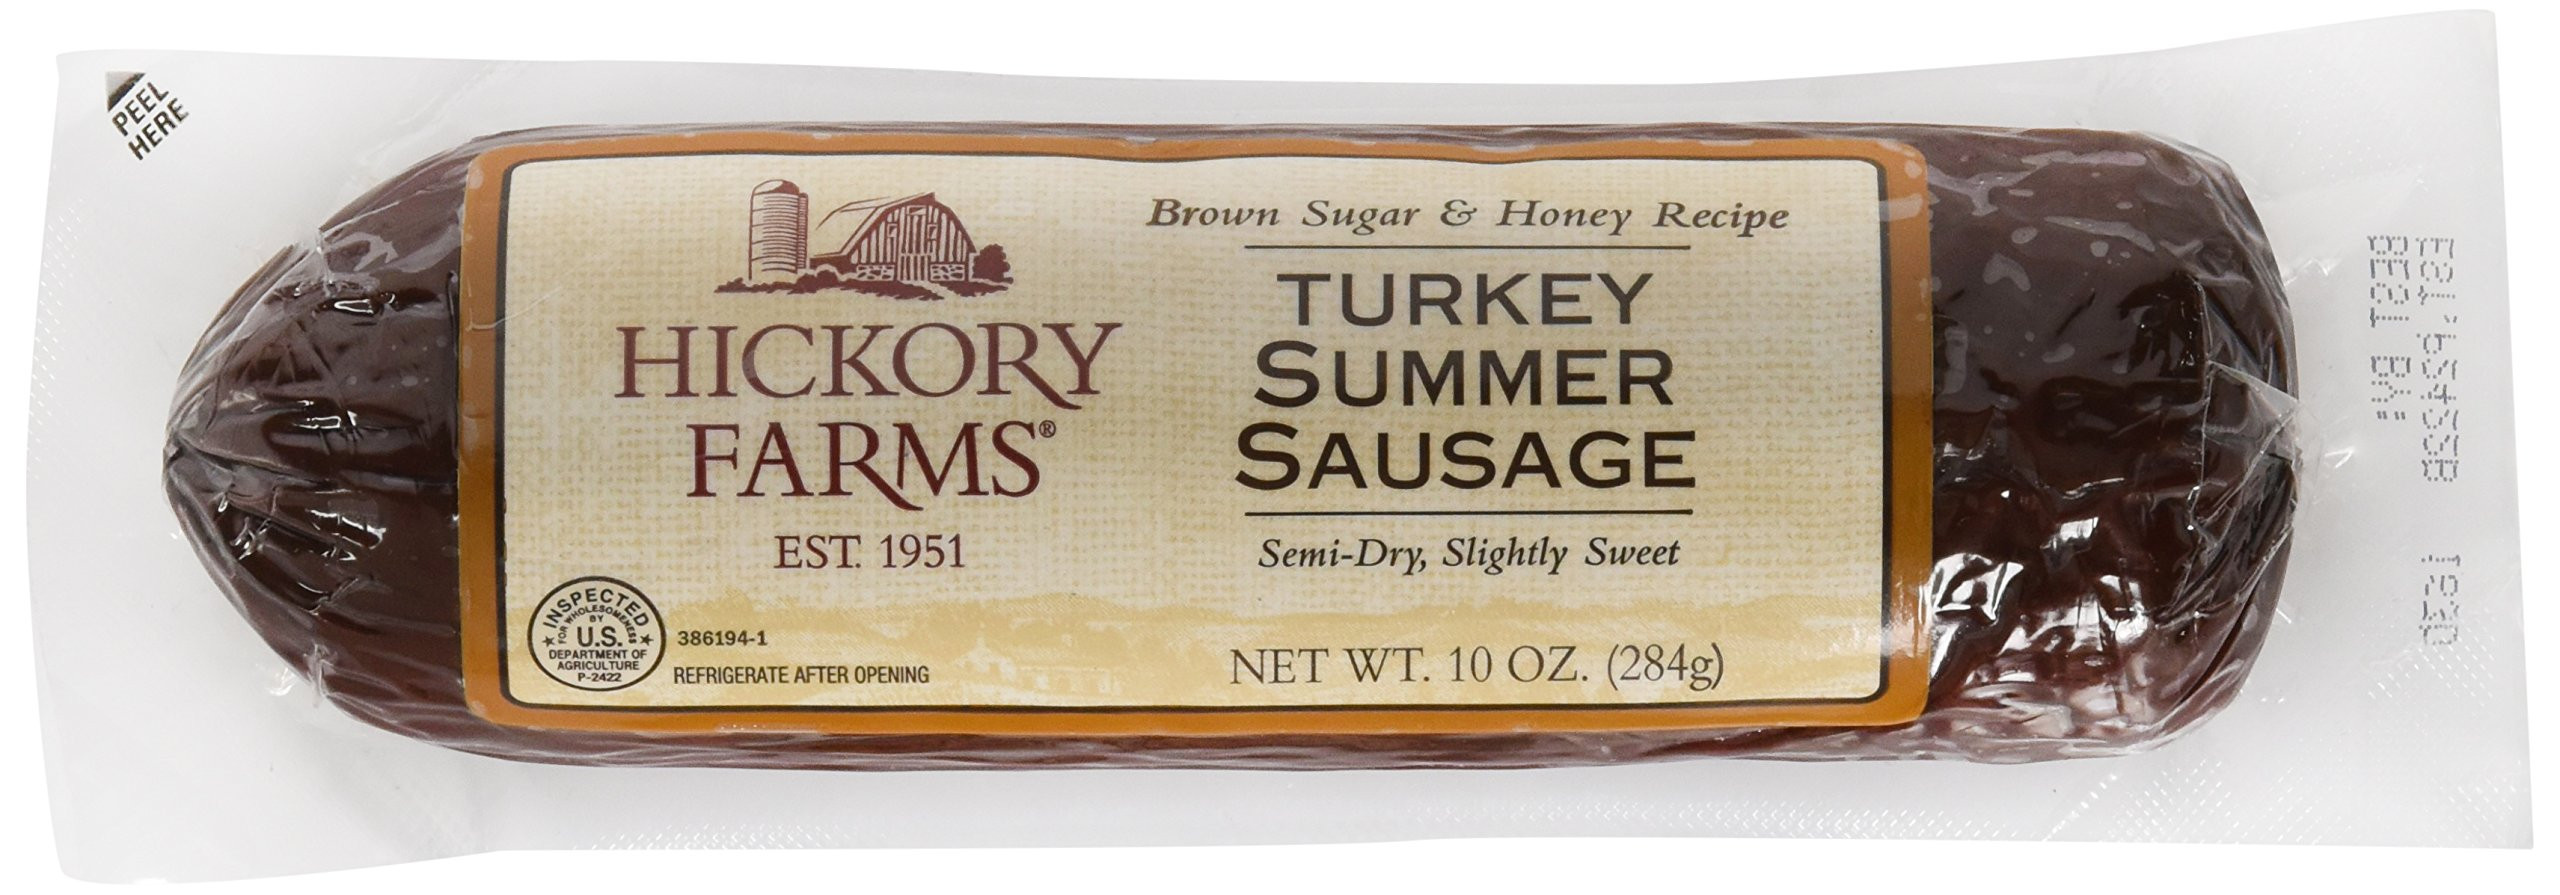 Hickory Farms Beef Summer Sausage
 Hickory Farms Beef Summer Sausage Amazon Grocery